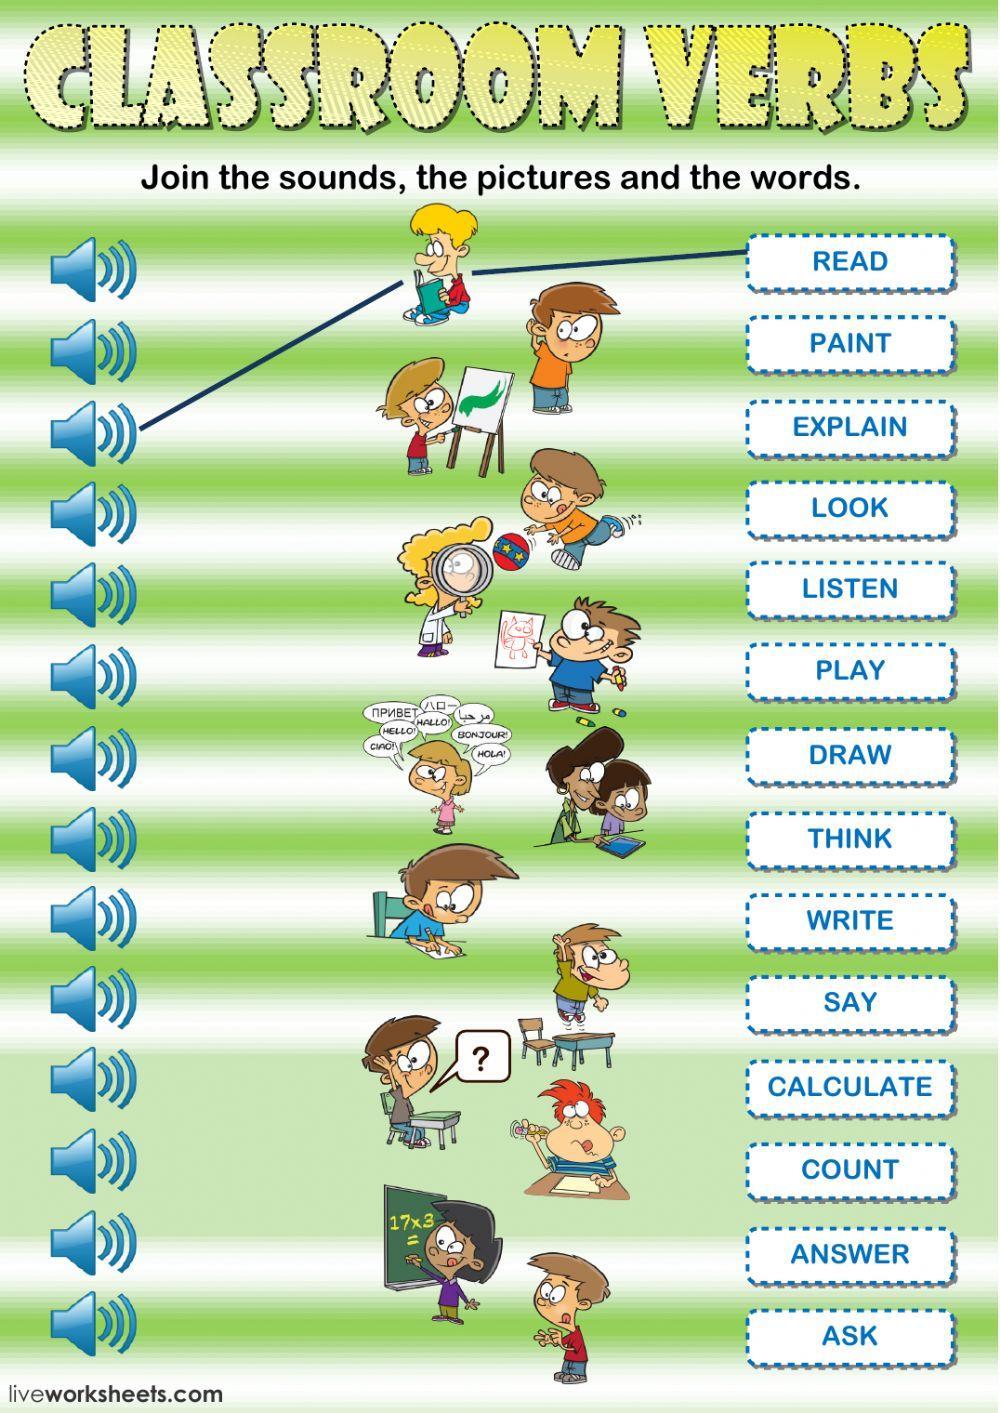 Classroom verbs - Listening and reading